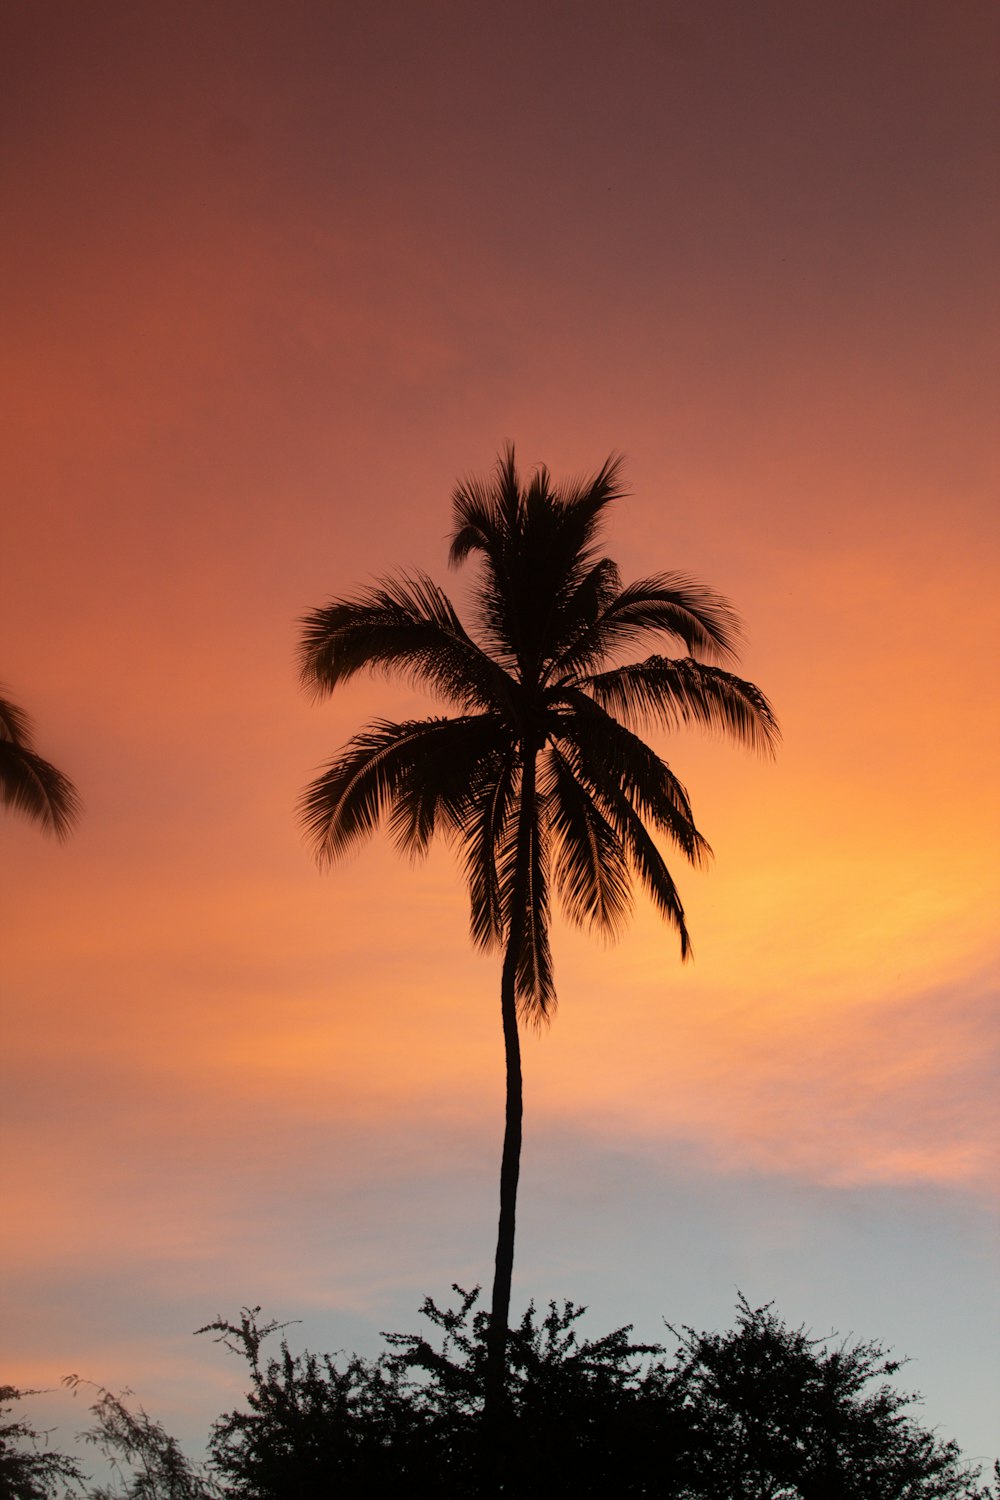 a palm tree silhouetted against a sunset sky